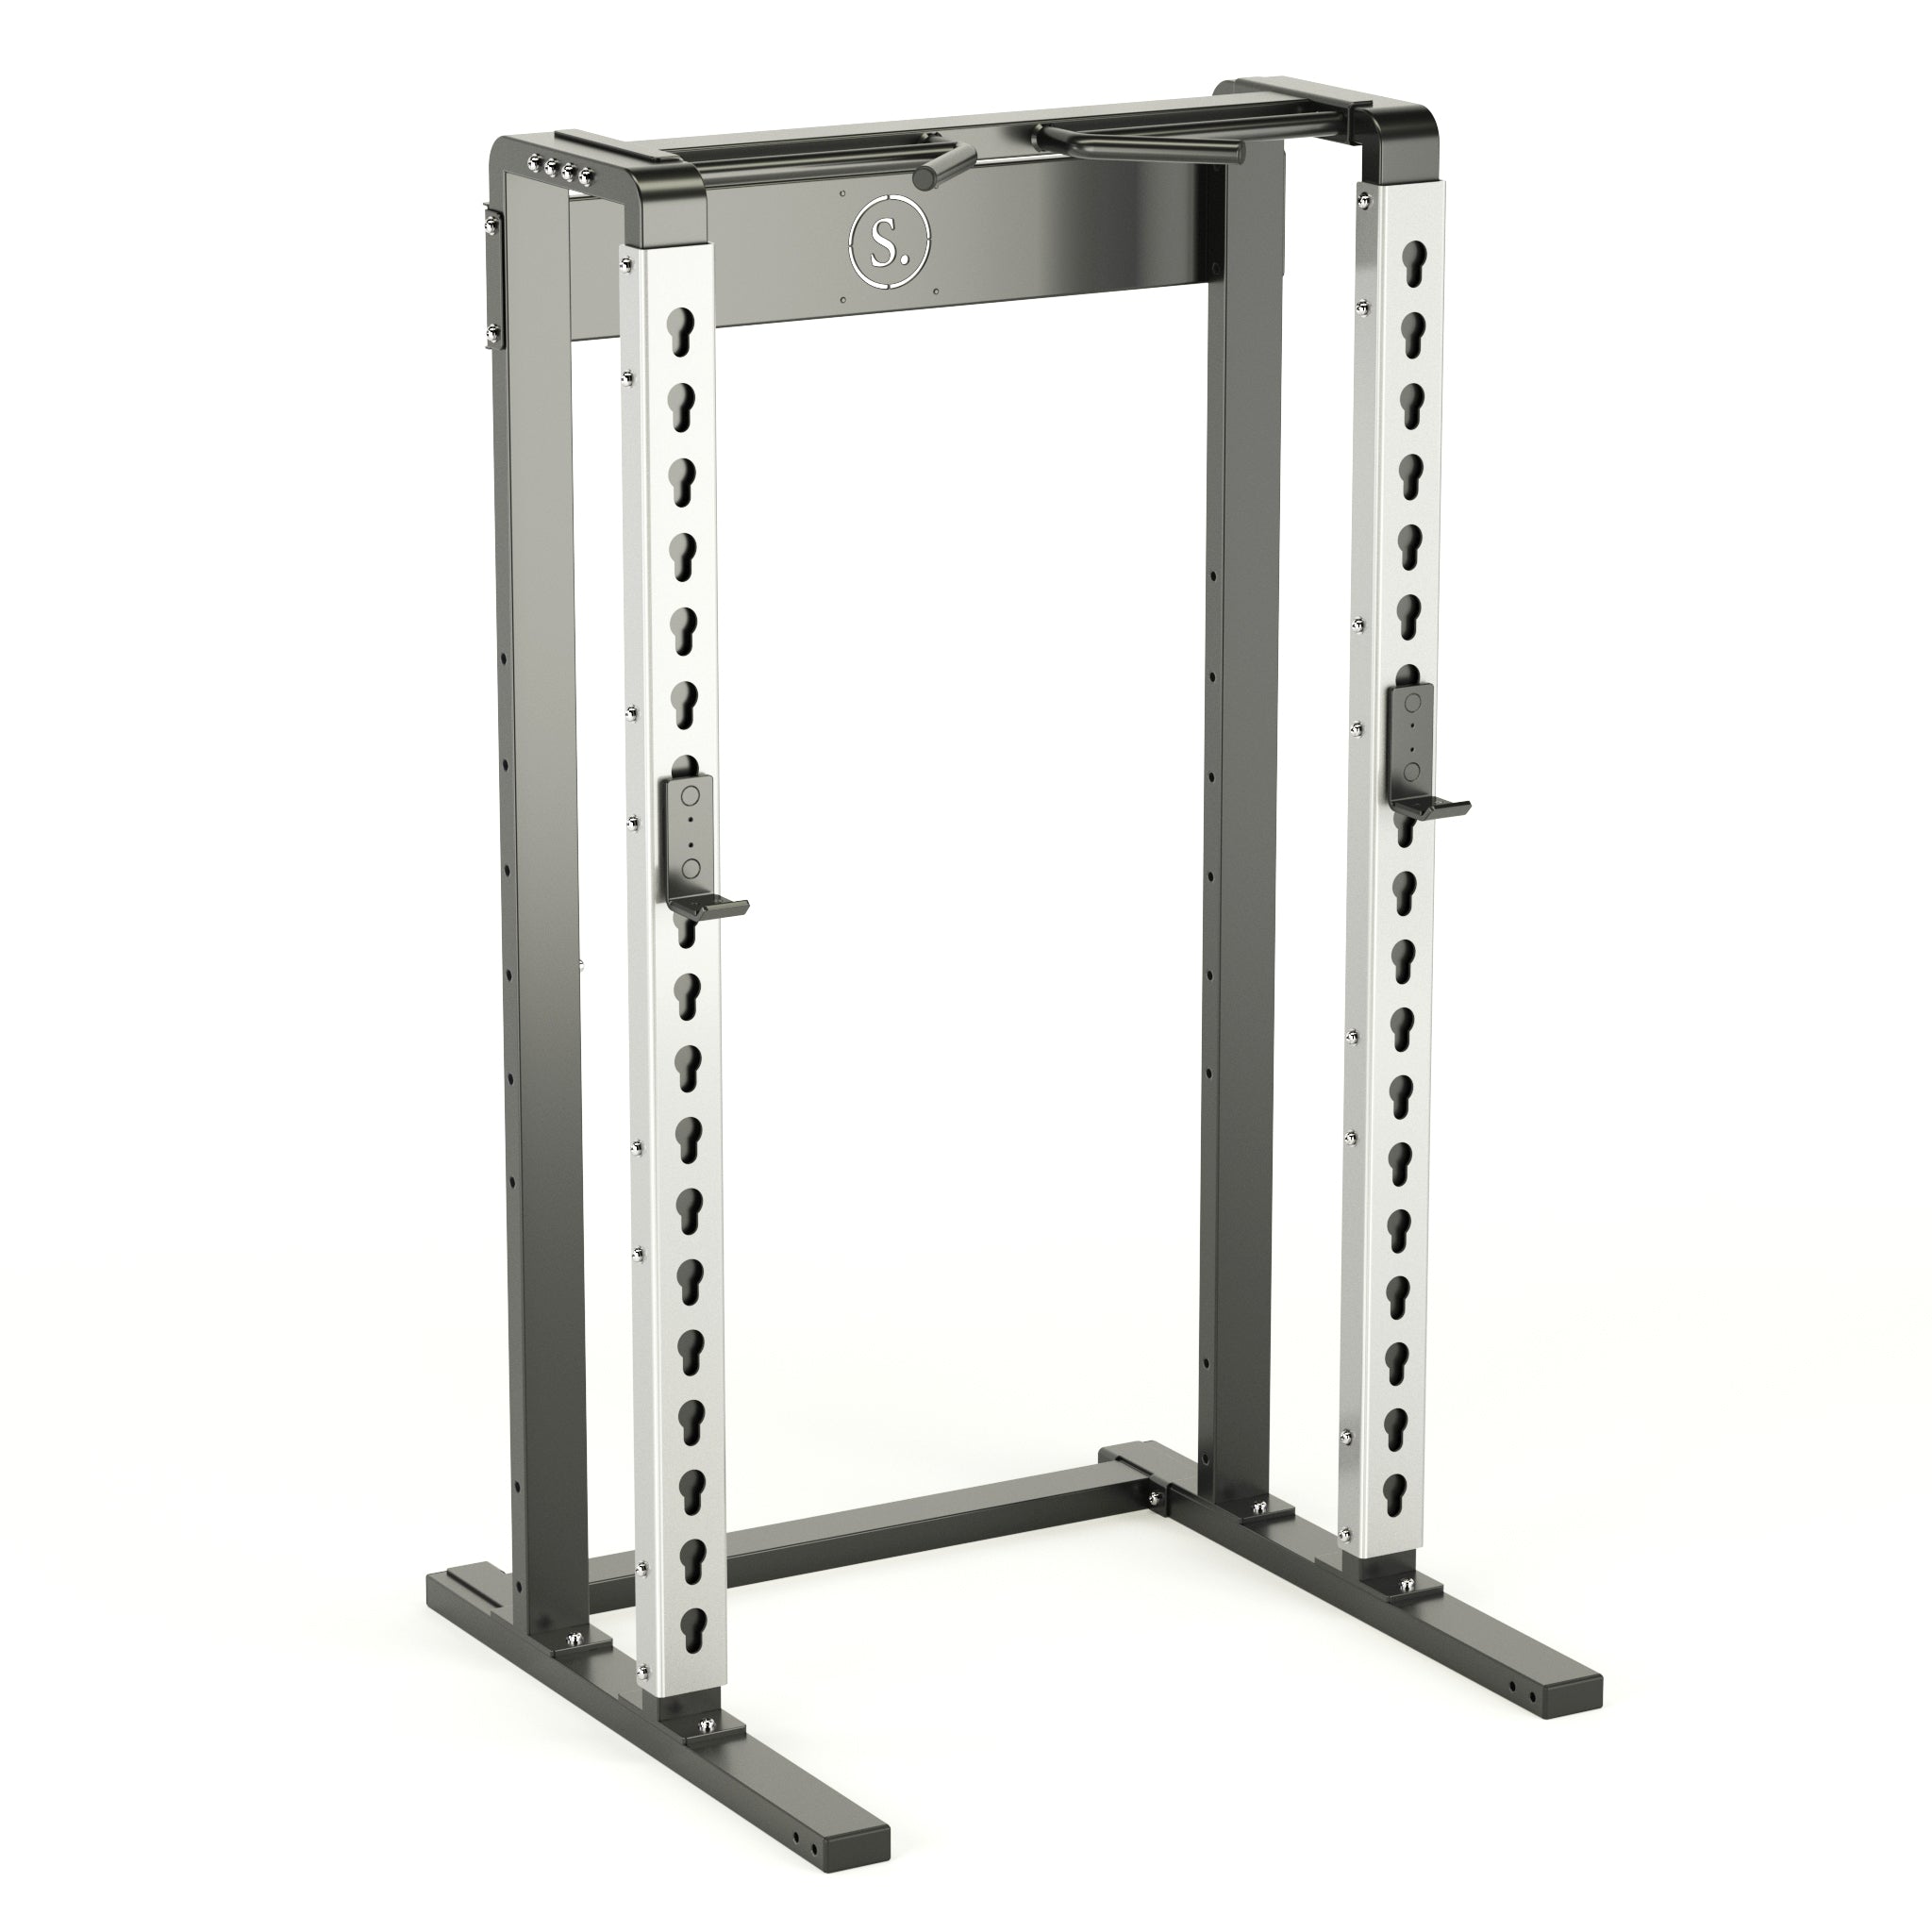 Solo Squat Rack in silver with multi-grip pull-up